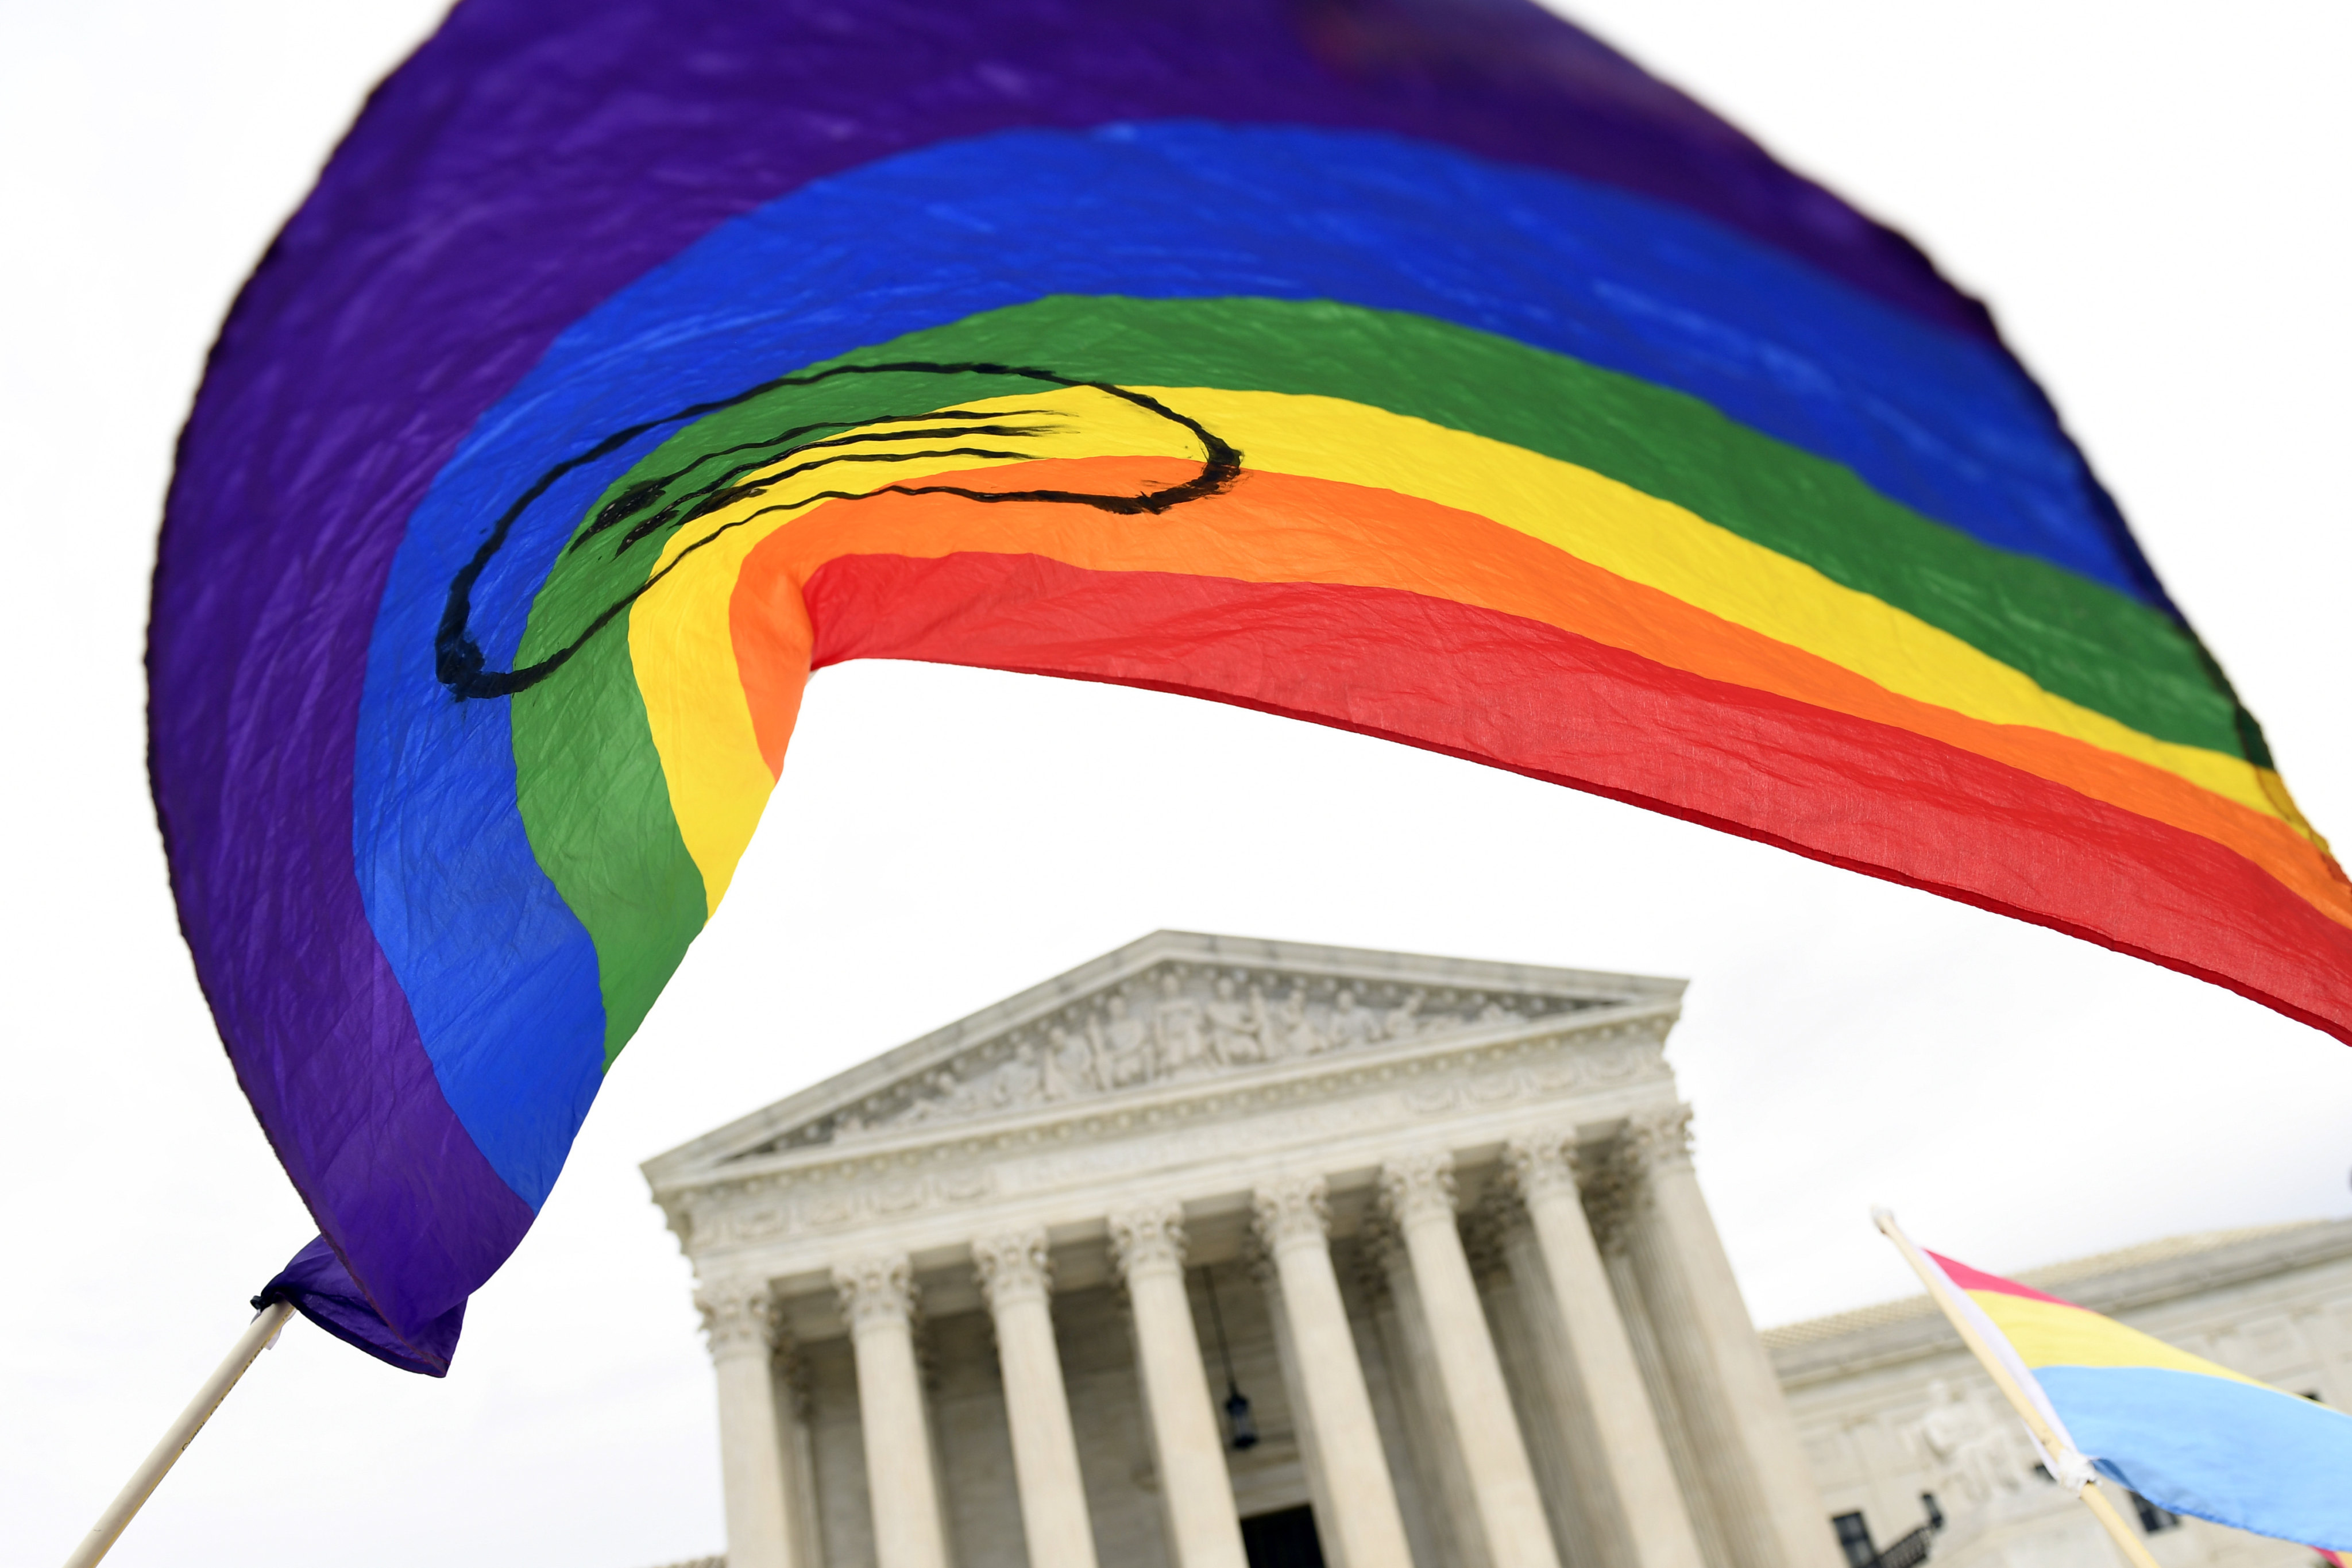 The bill to protect same-sex marriage was passed in response to fears that the US Supreme Court could overturn a 2015 decision that legalised it nationwide. Photo: AP